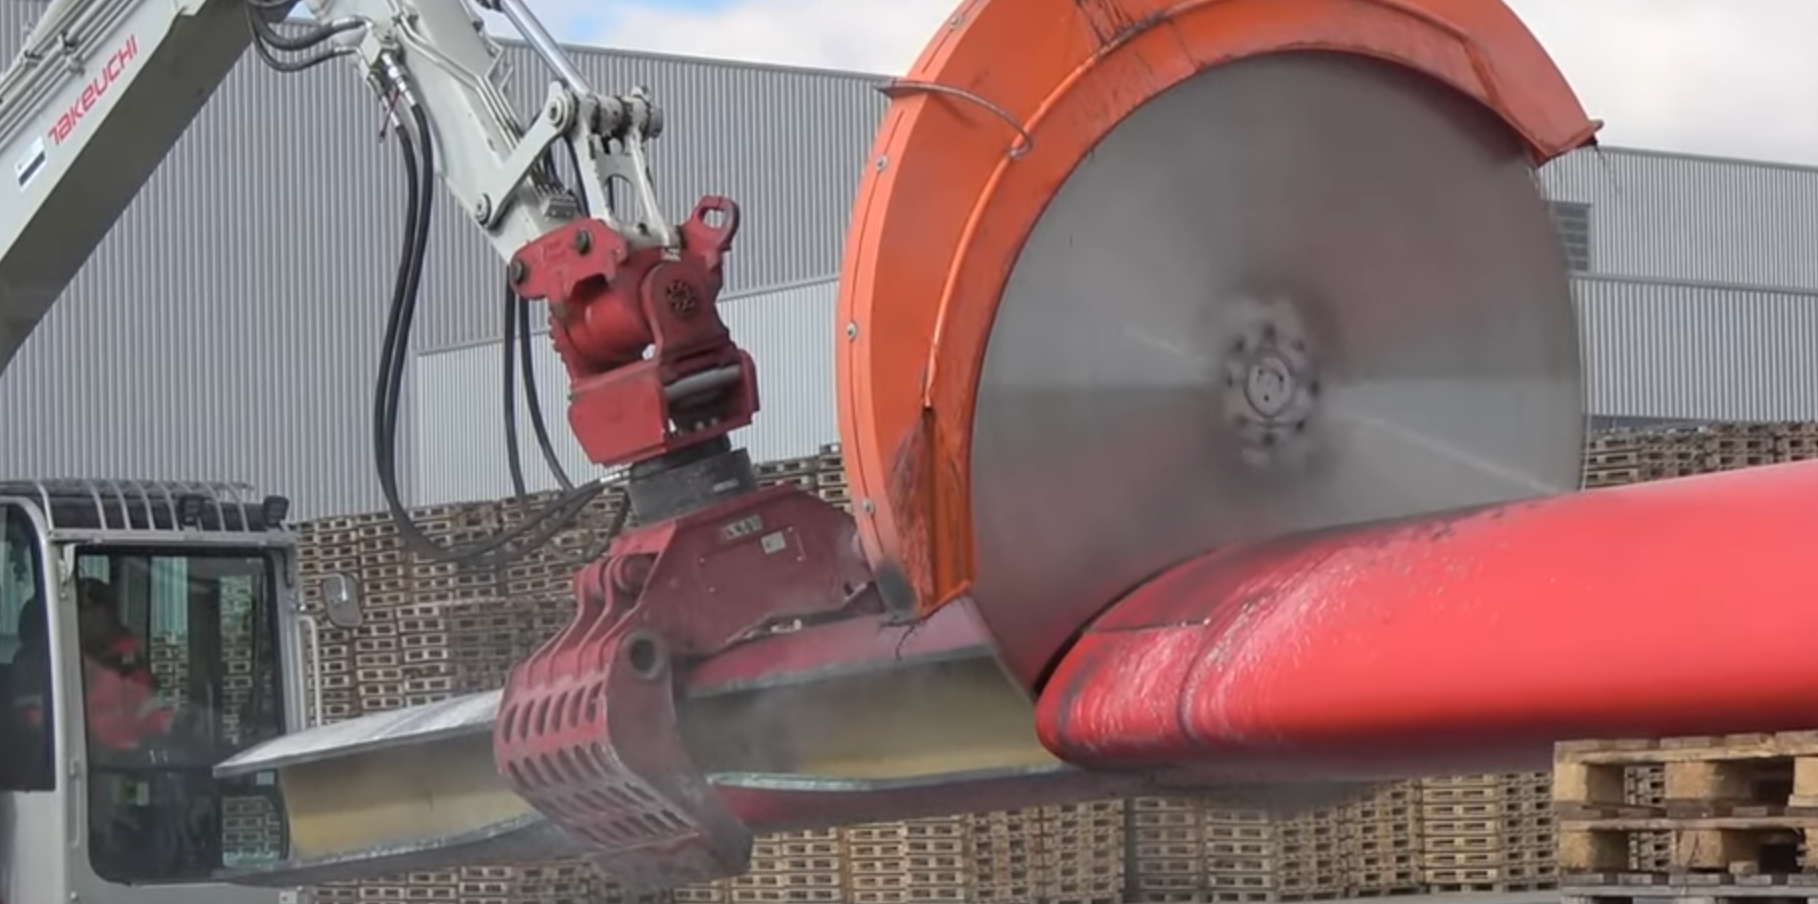 Cut through all the layers Efficiently cut windturbine blades with large blades and <br>Echidna high-performance excavator saws